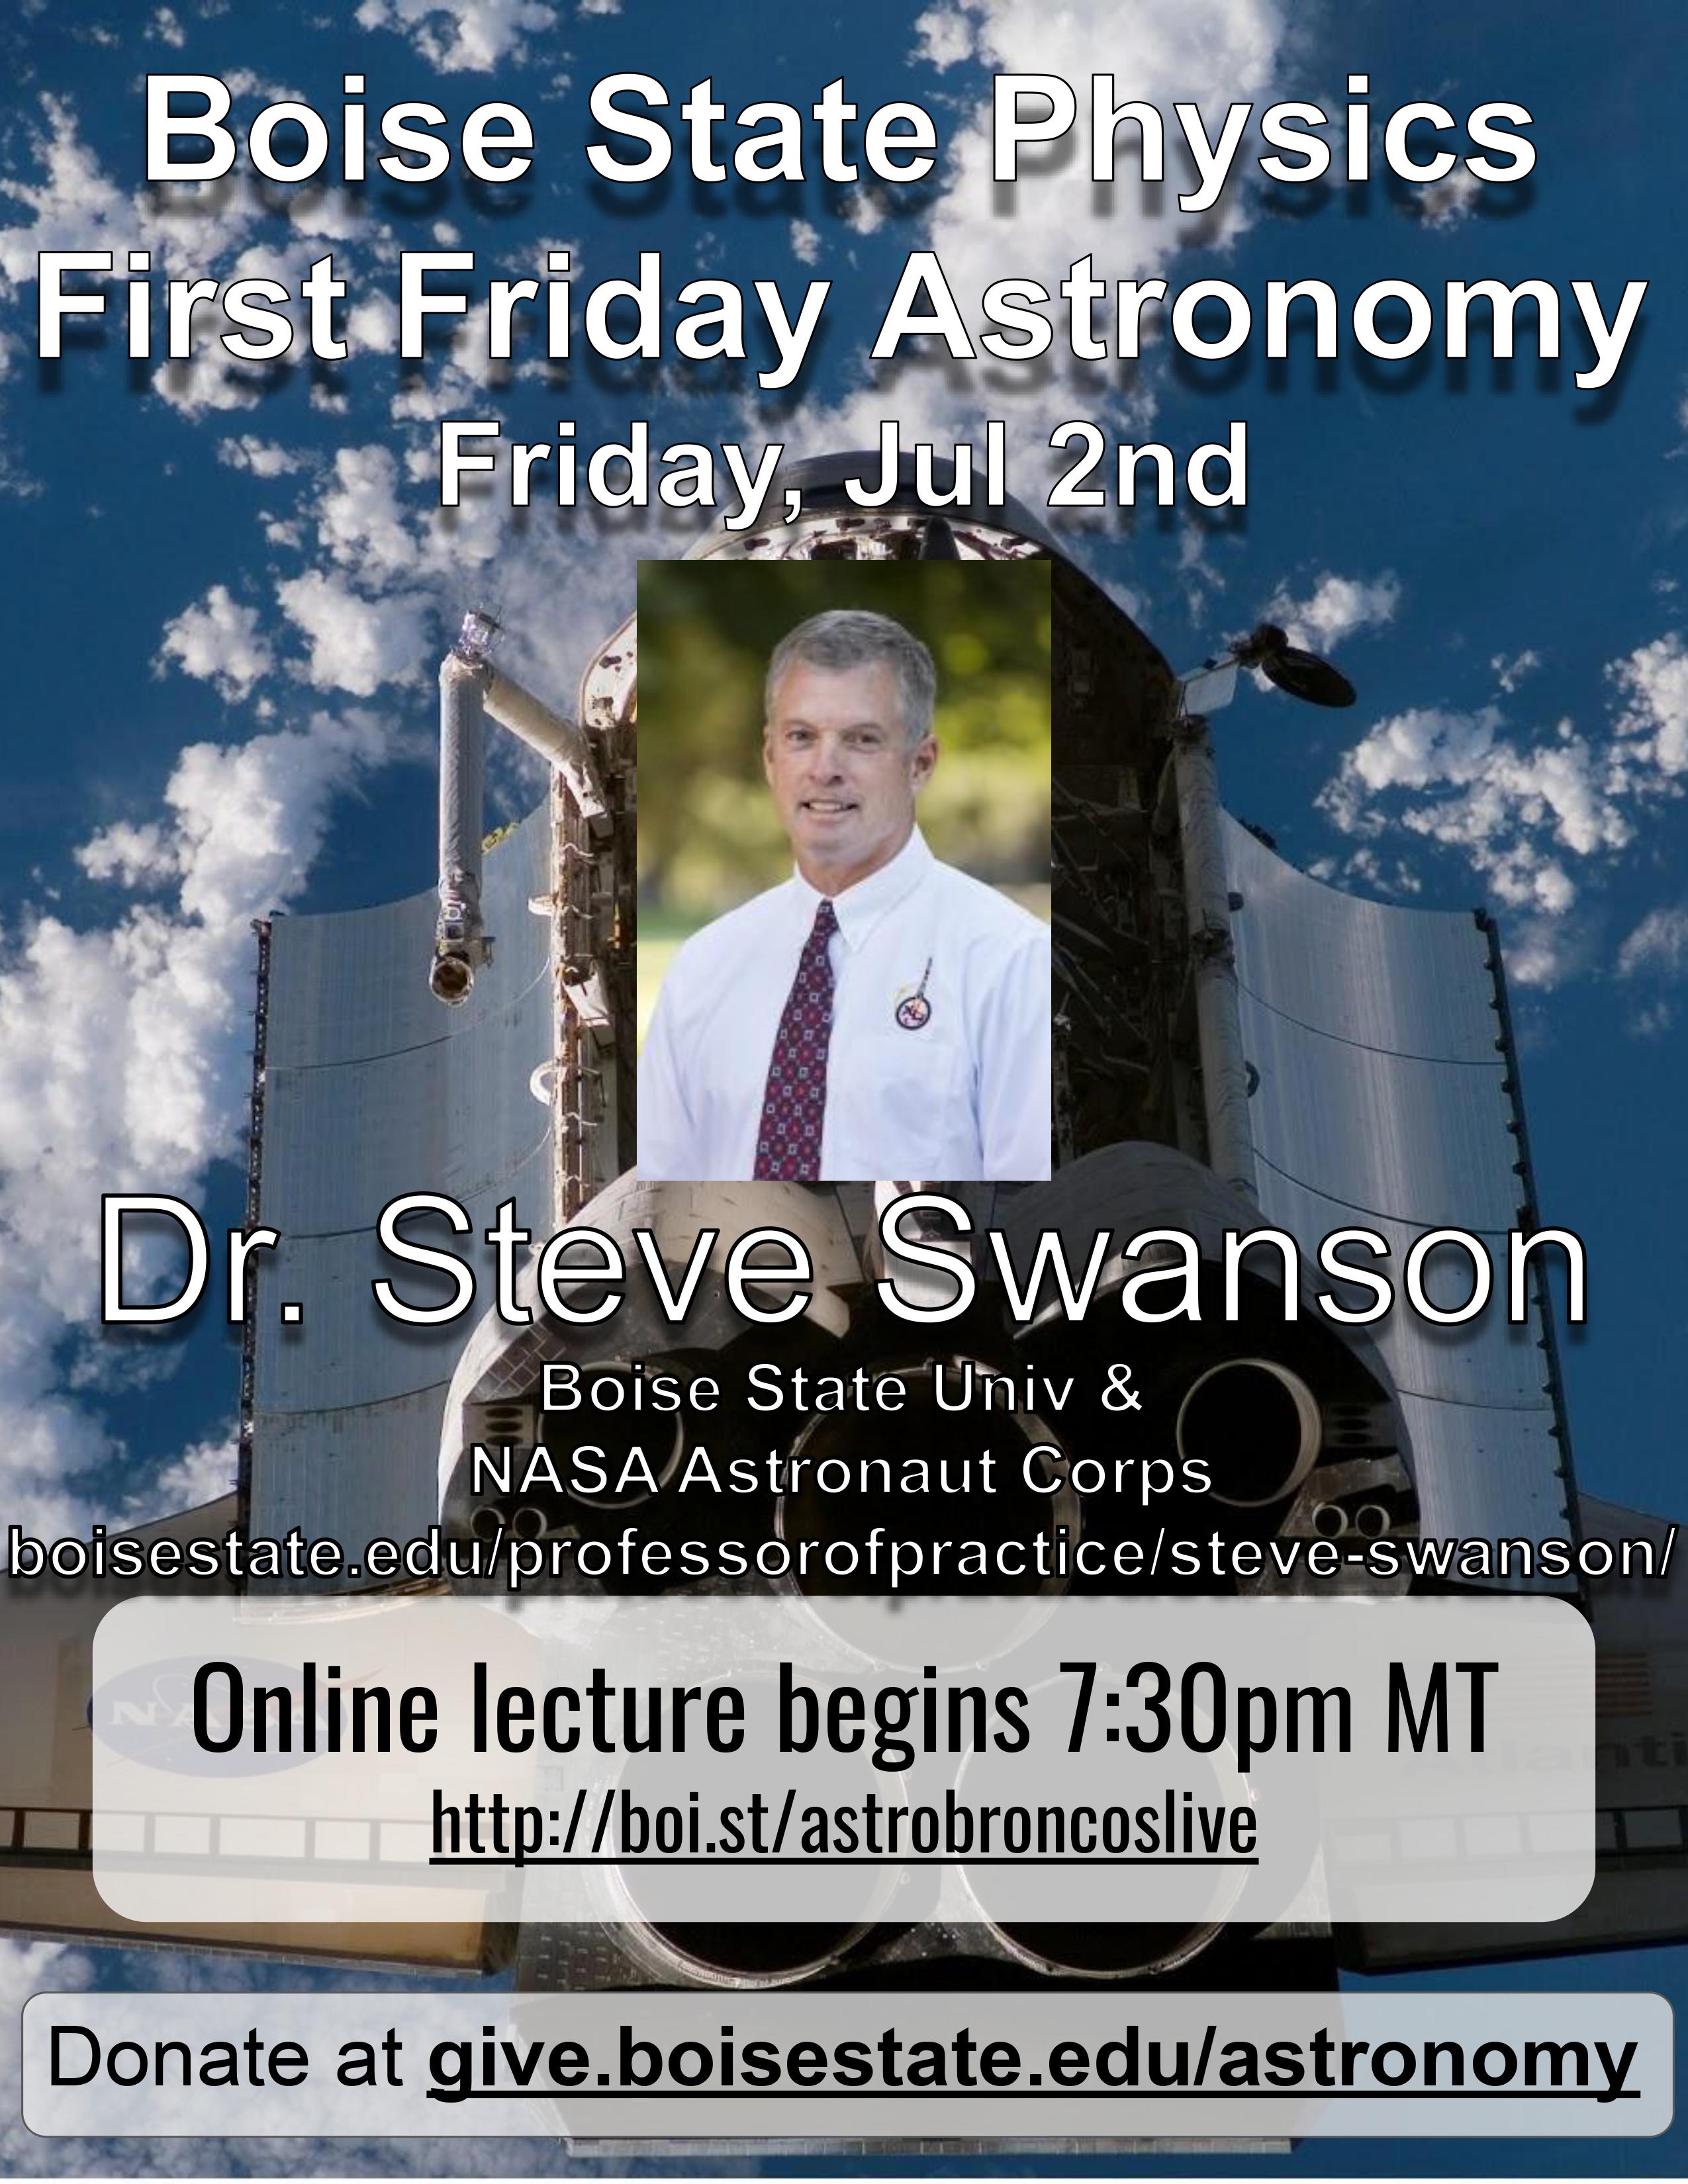 Flyer for First Friday Astronomy Event